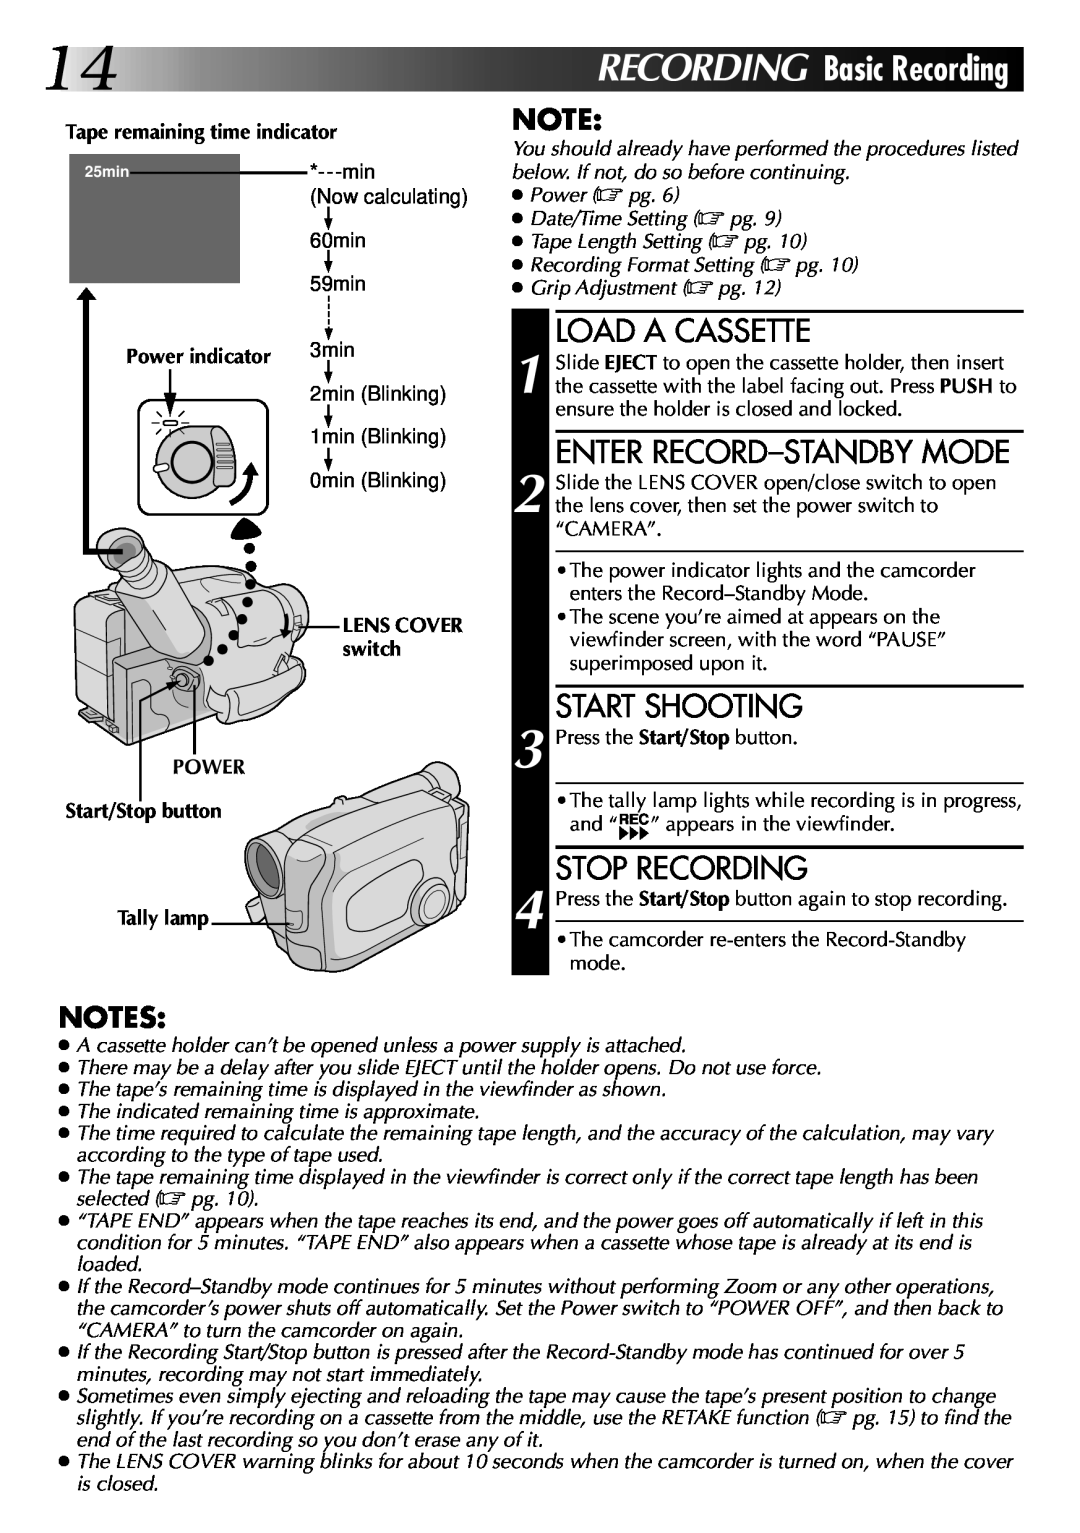 JVC LYT0002-0Q4A RECORDING Basic Recording, Load A Cassette, Enter Record-Standby Mode, Start Shooting, Stop Recording 